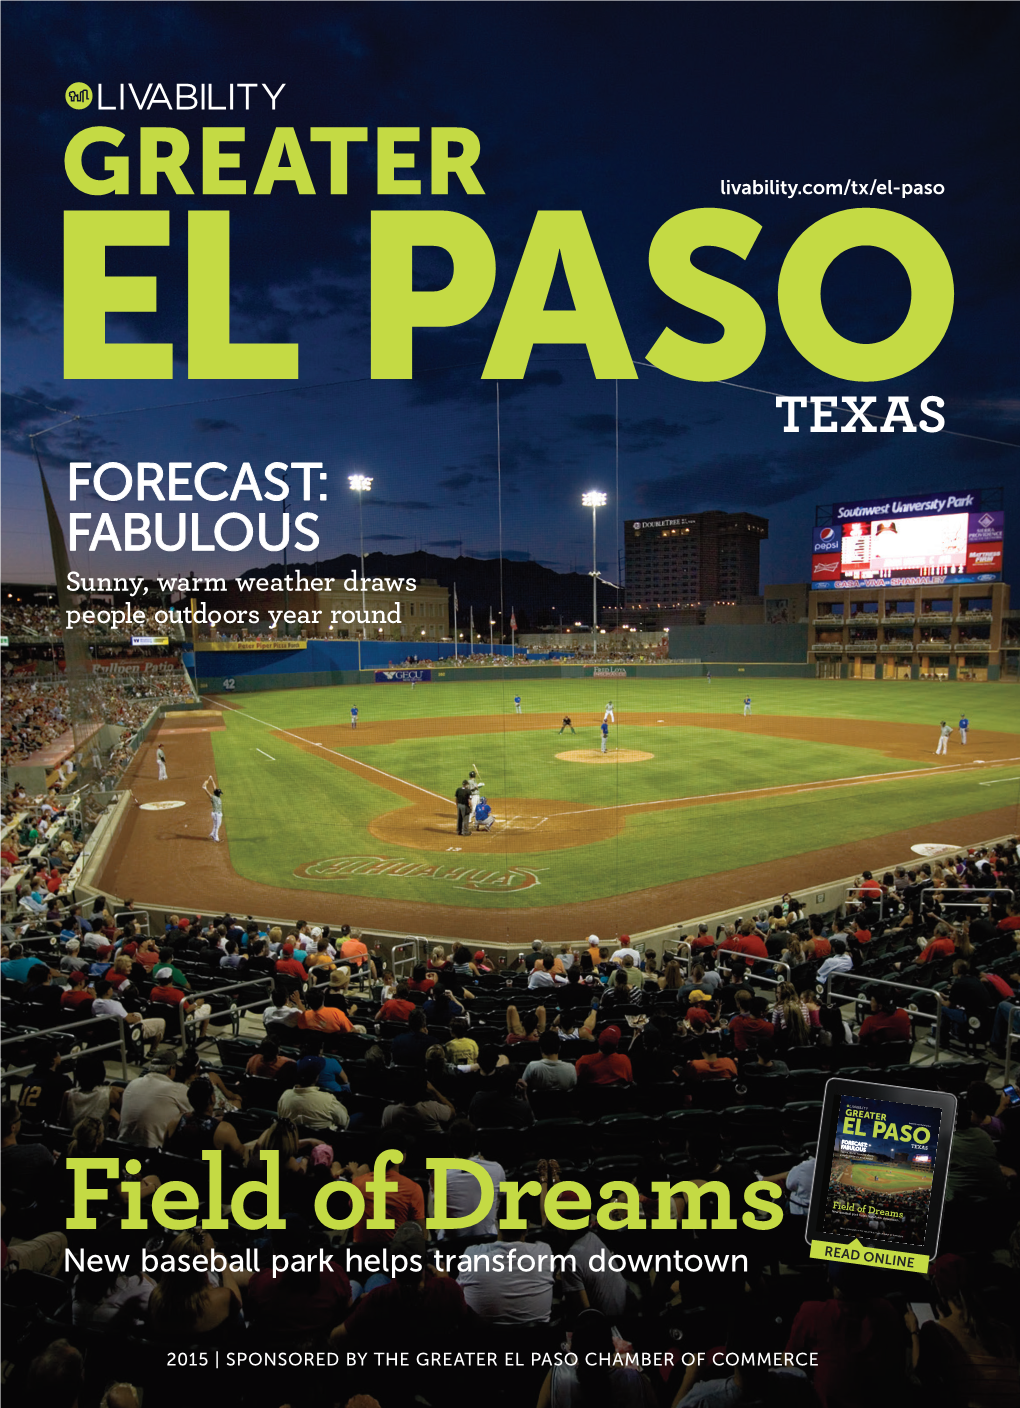 EL PASO TEXAS FORECAST: FABULOUS Sunny, Warm Weather Draws People Outdoors Year Round